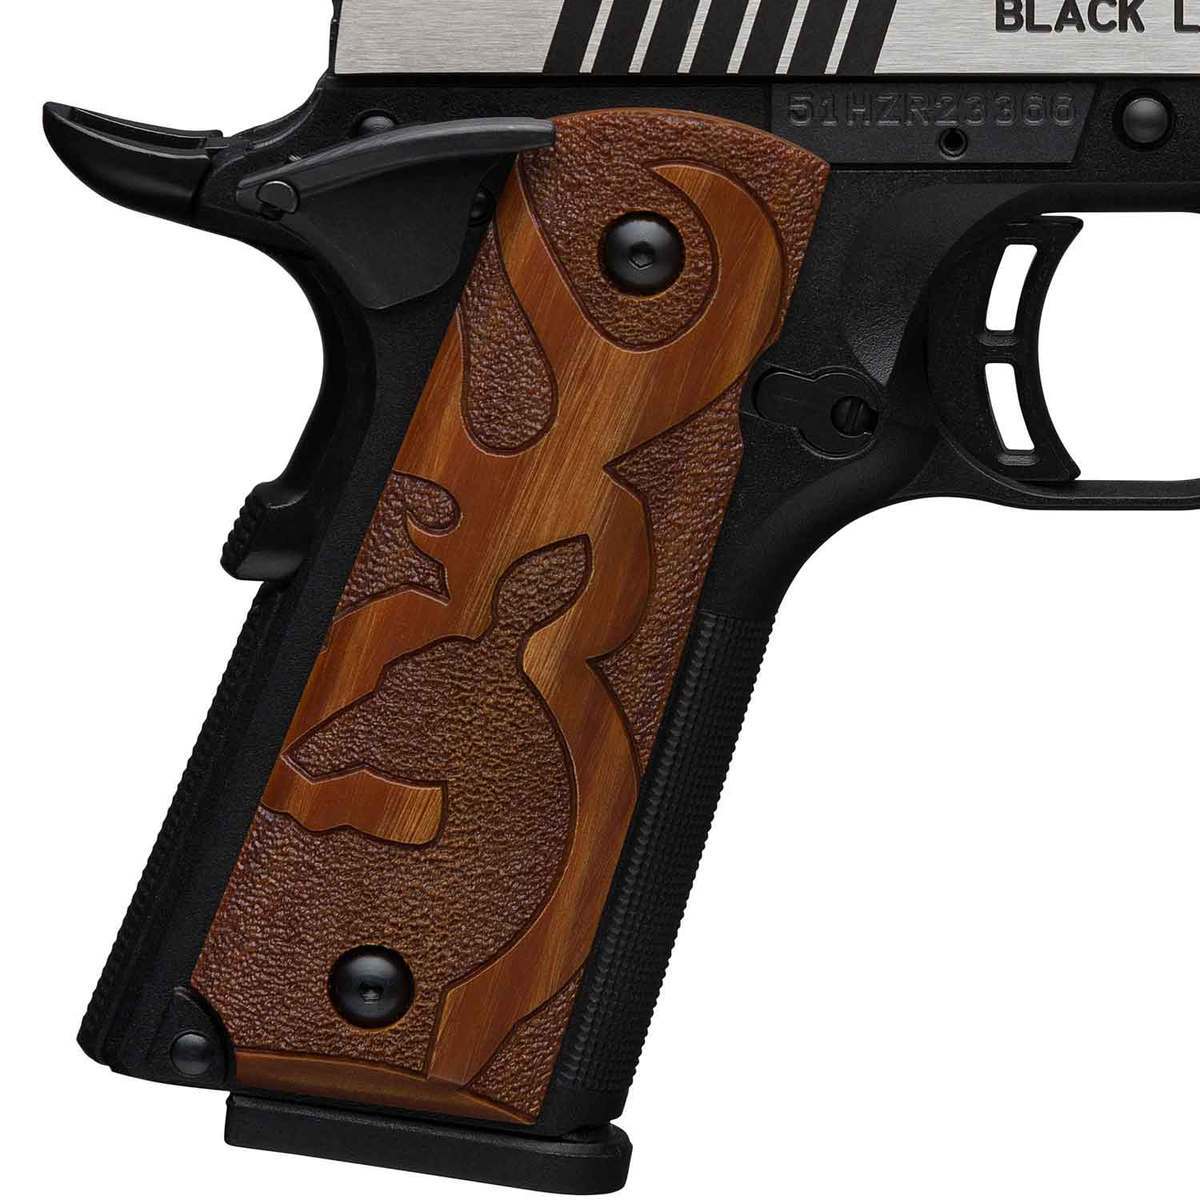 Browning 1911 380 Black Label Medallion Logo Grips 380 Auto Acp 425in Stainlesswood Pistol 8499